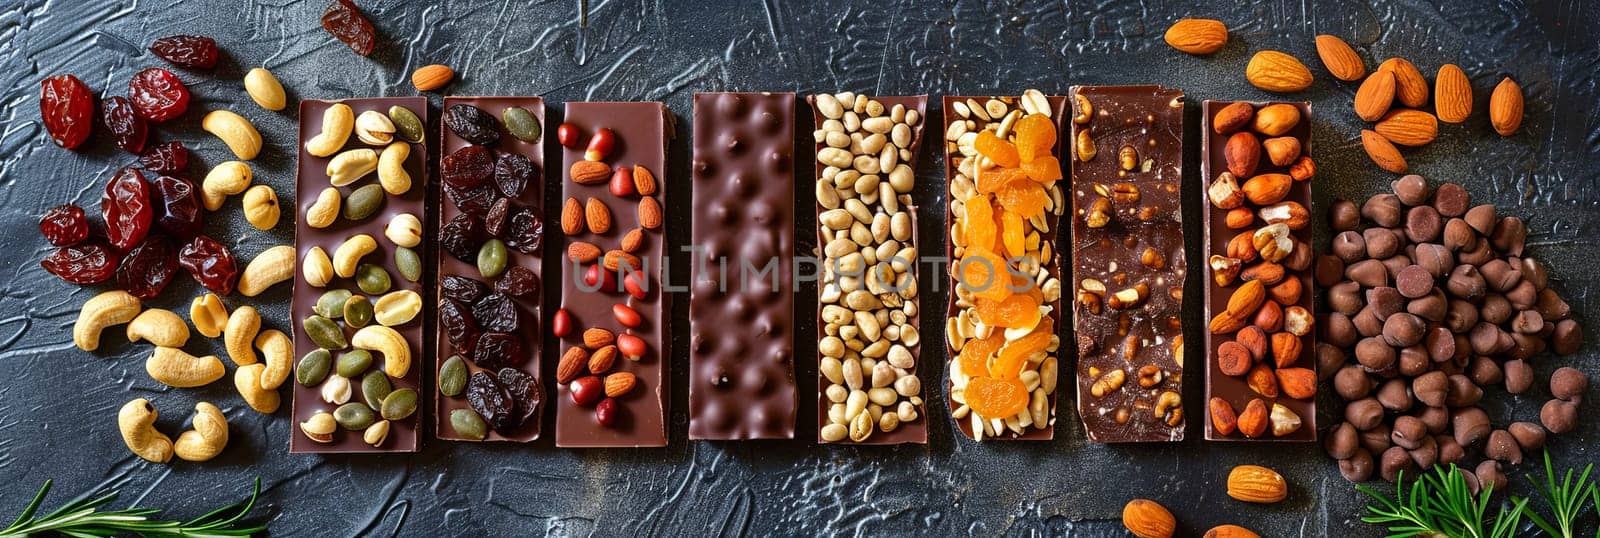 A variety of food items, including chocolate bars, nuts, and dried fruits, displayed on a table.